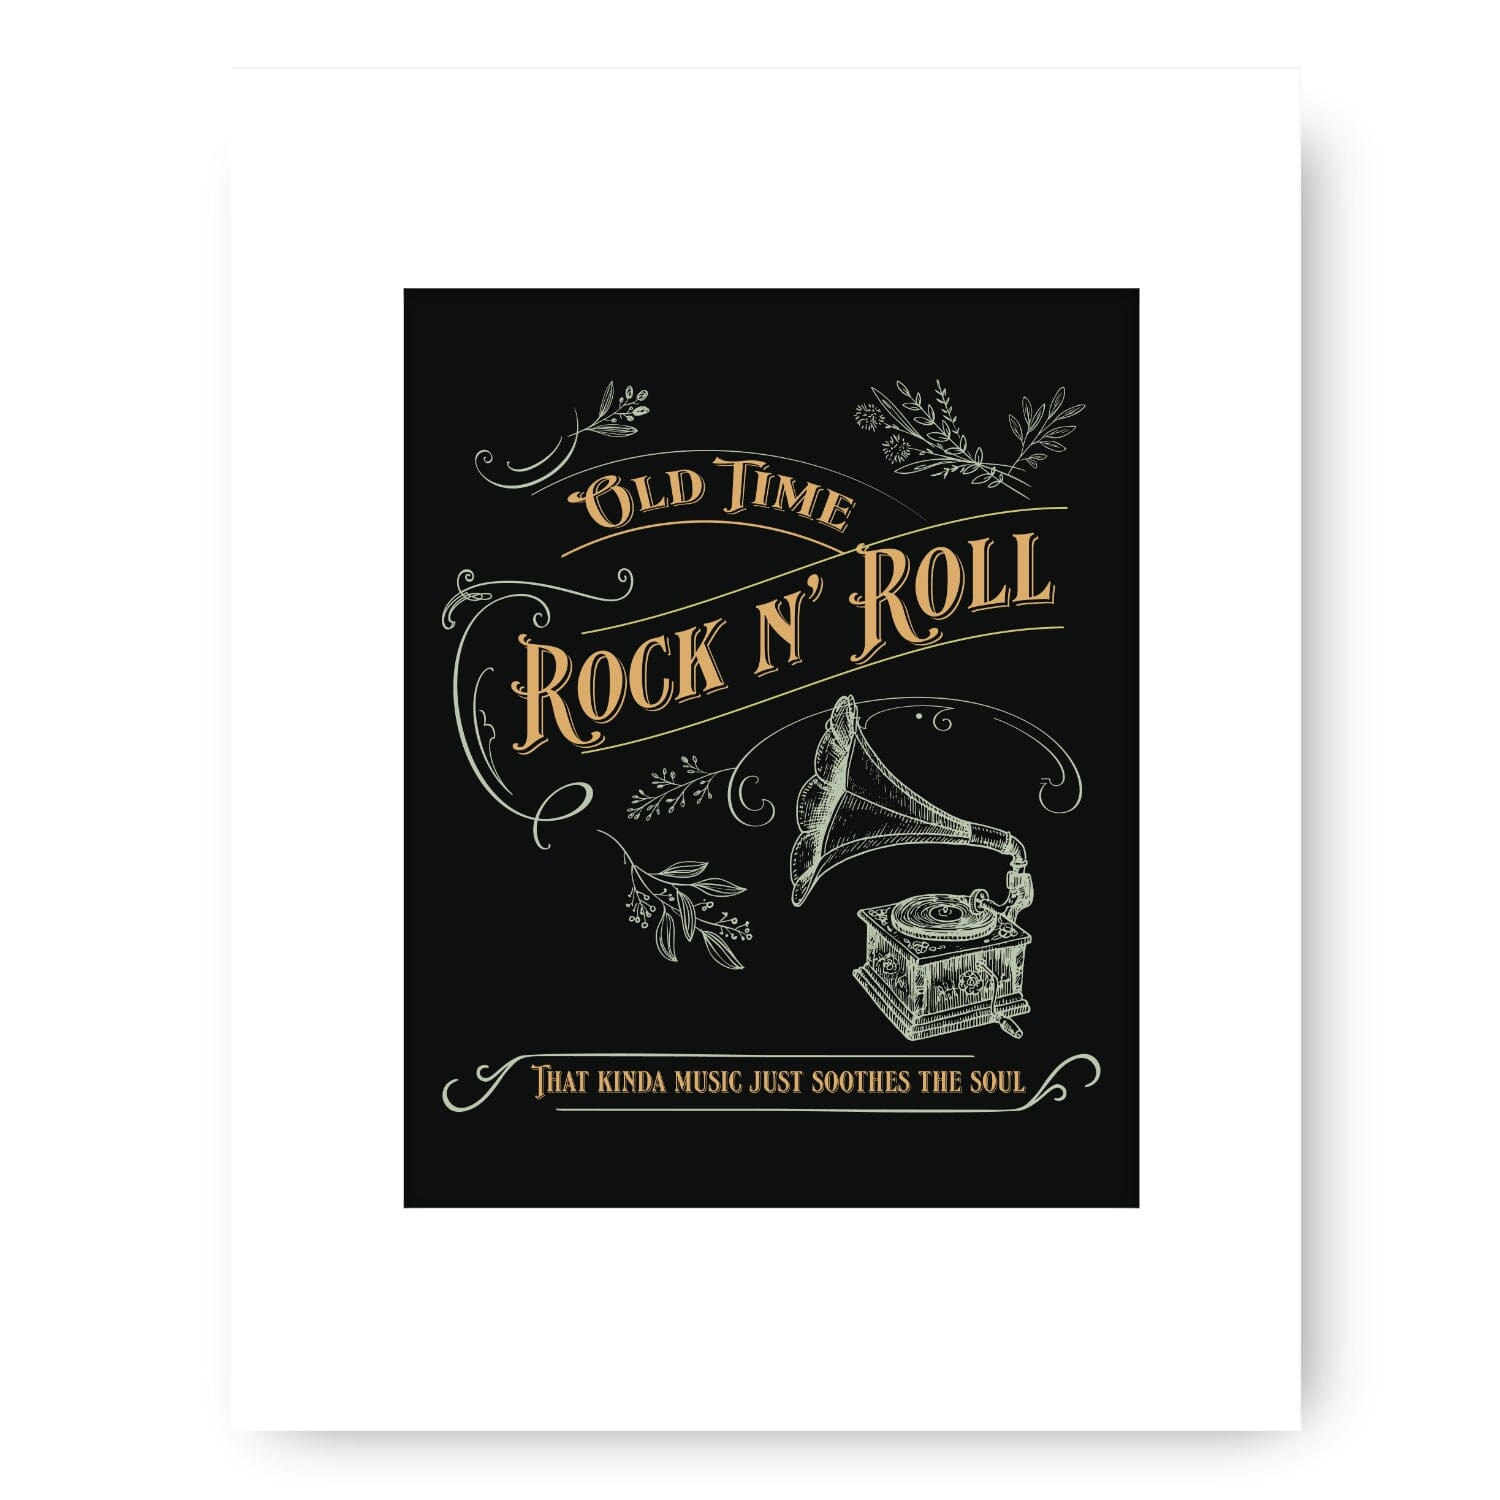 Old Time Rock N' Roll by Bob Seger - Song Lyrics Art Print Song Lyrics Art Song Lyrics Art 8x10 Unframed White Matted Print 